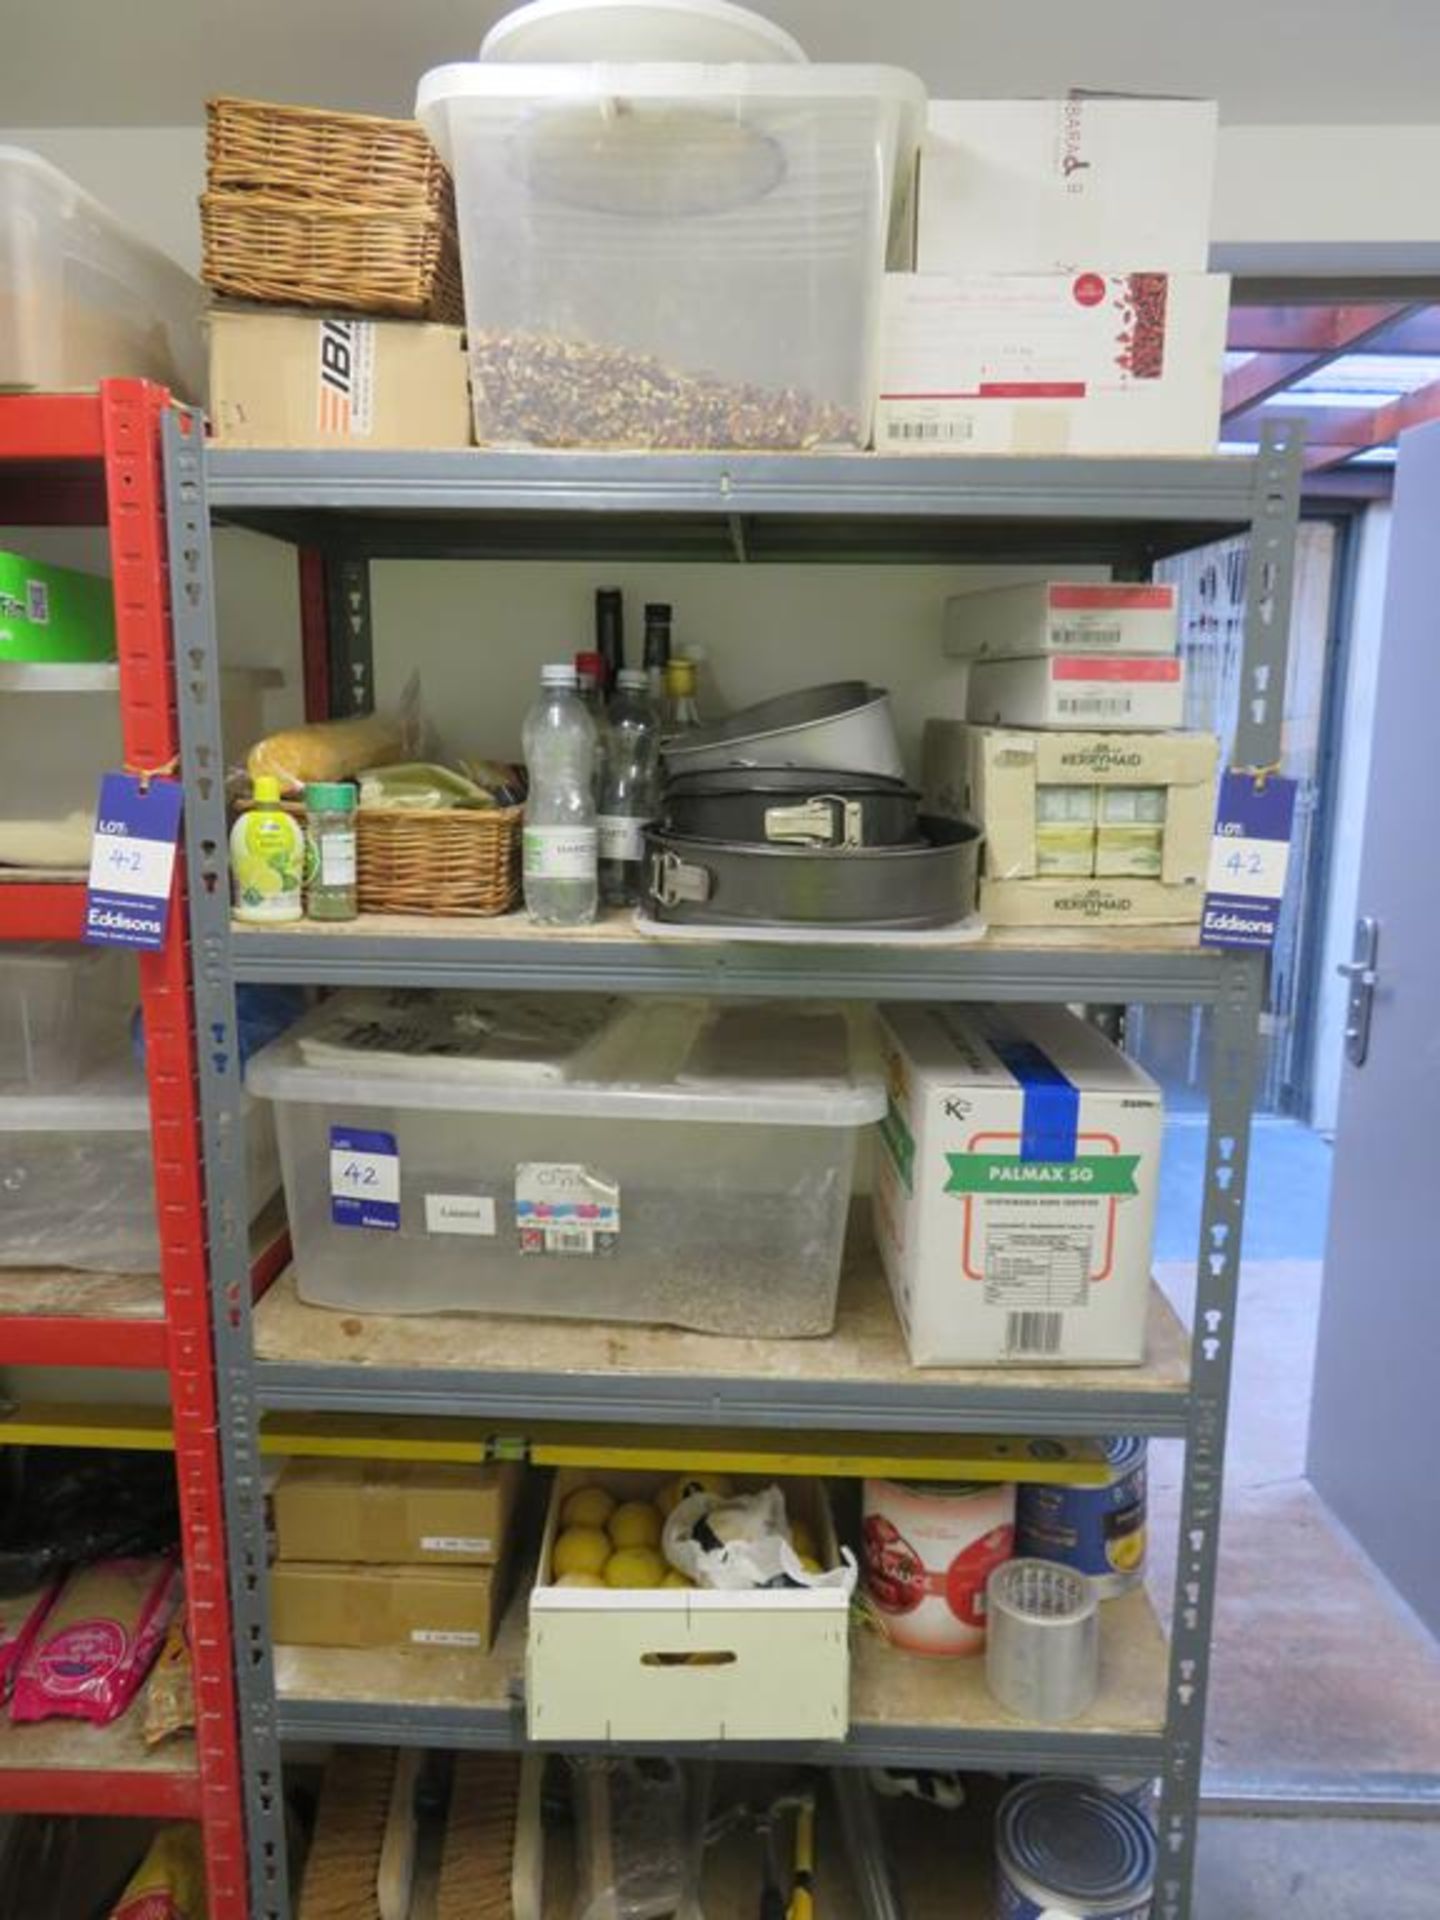 2 x Storage Racks, Trolley and Contents. Baking Ingredients, Tools, Packaging etc - Image 2 of 5